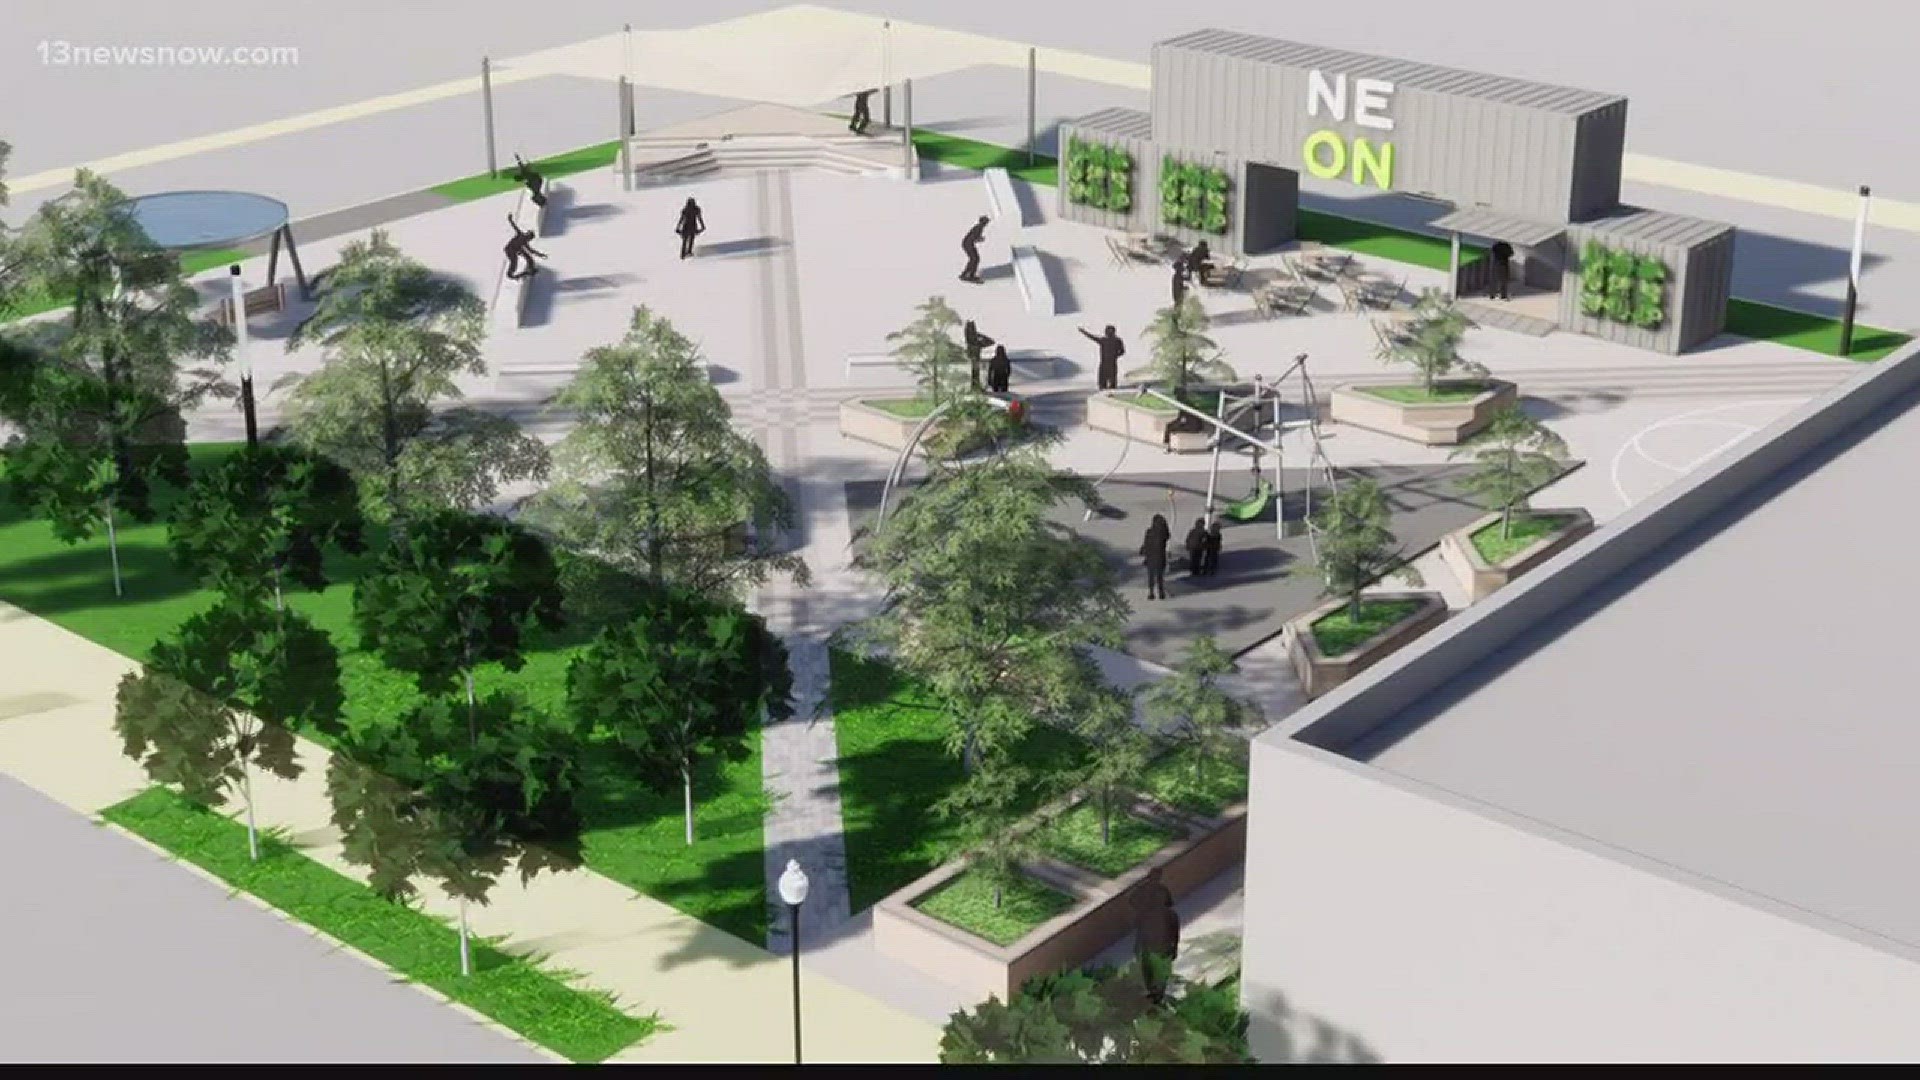 The Downtown Norfolk Council is working on a project that would create a park on a piece of city property